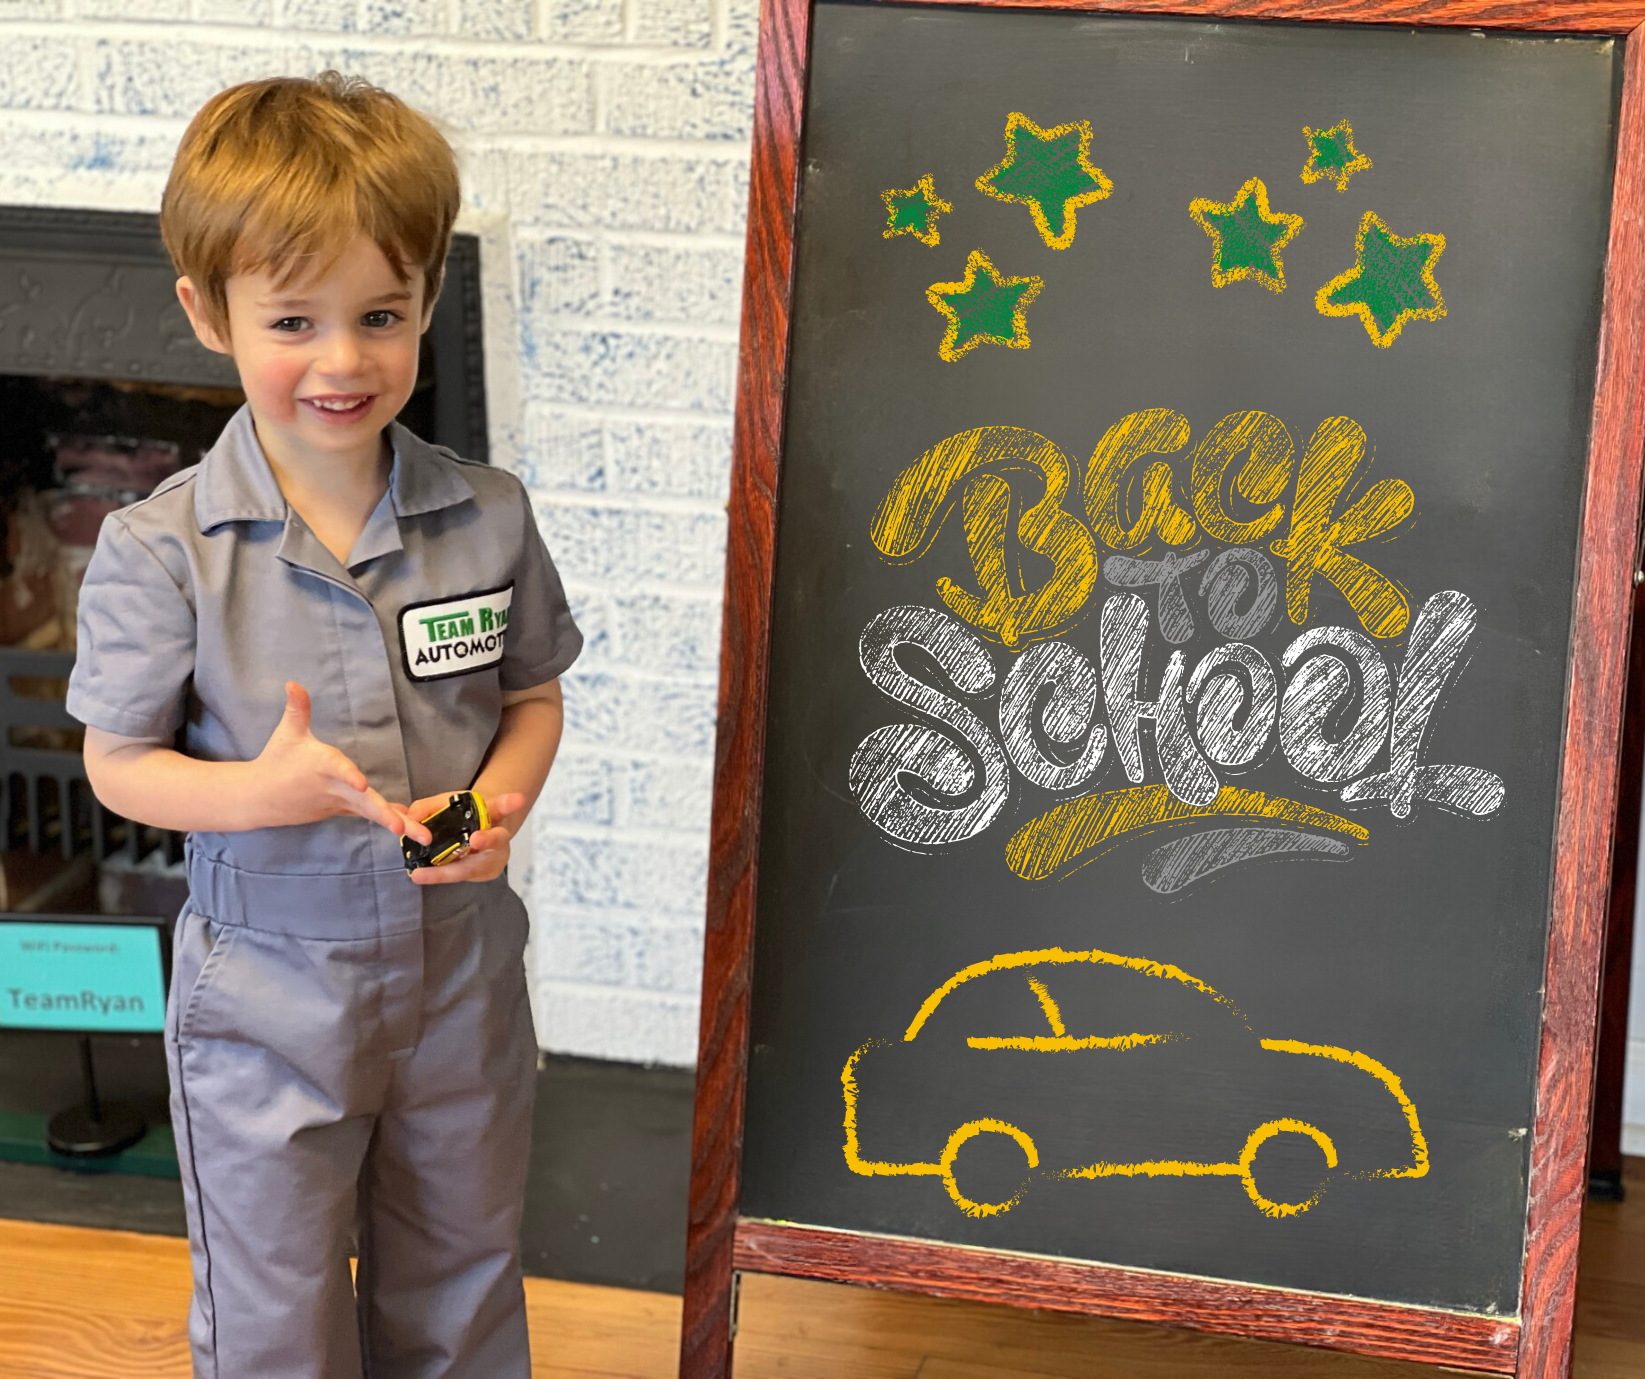 It’s Time For Back to School! Is Your Vehicle Ready?